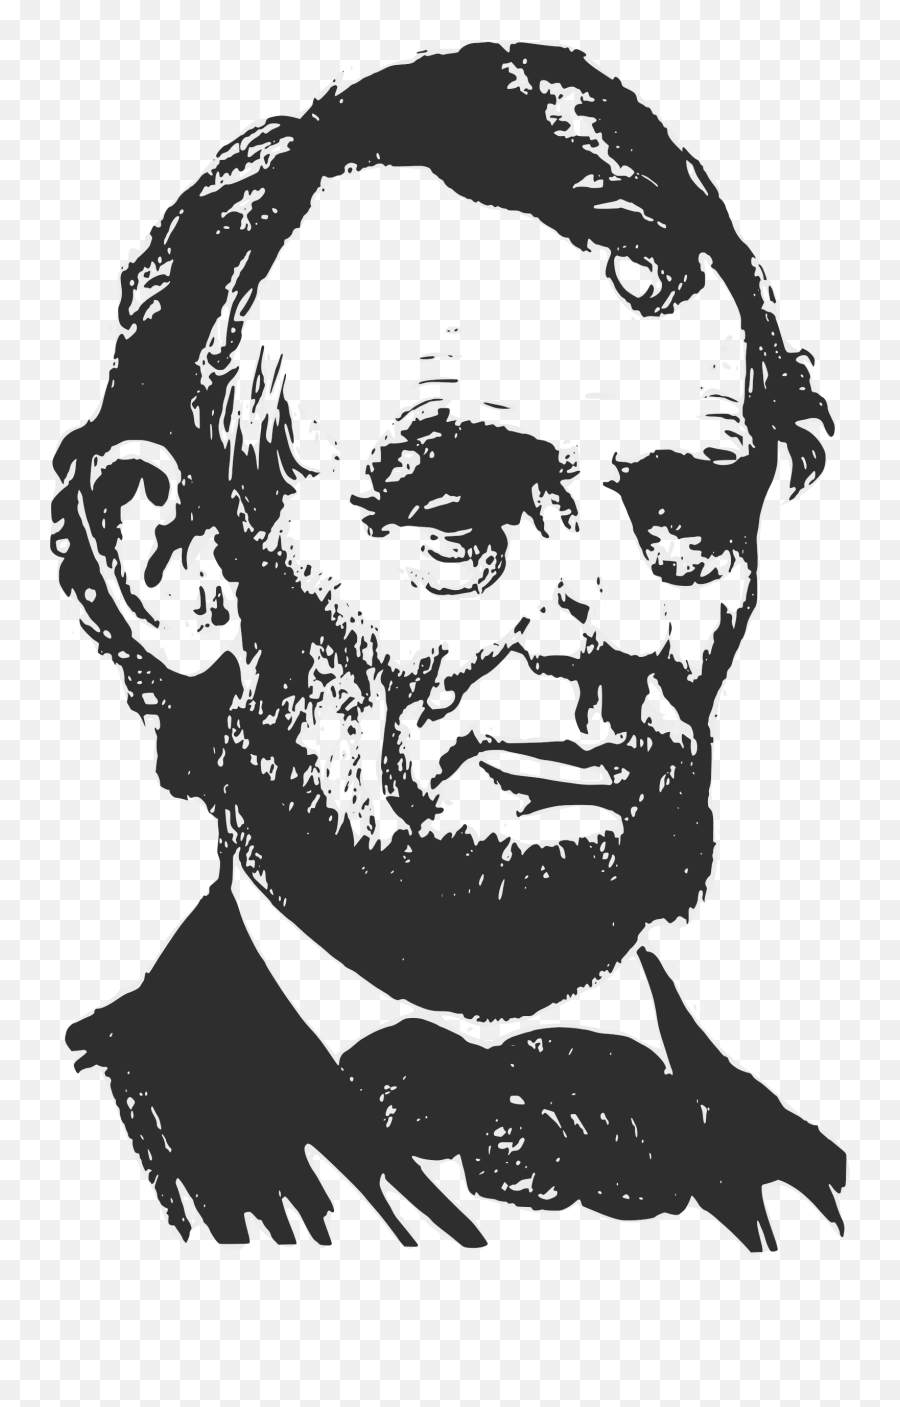 Face Png And Vectors For Free Download - Dlpngcom Abraham Lincoln Face Silhouettes Emoji,Abraham Lincoln Emoji